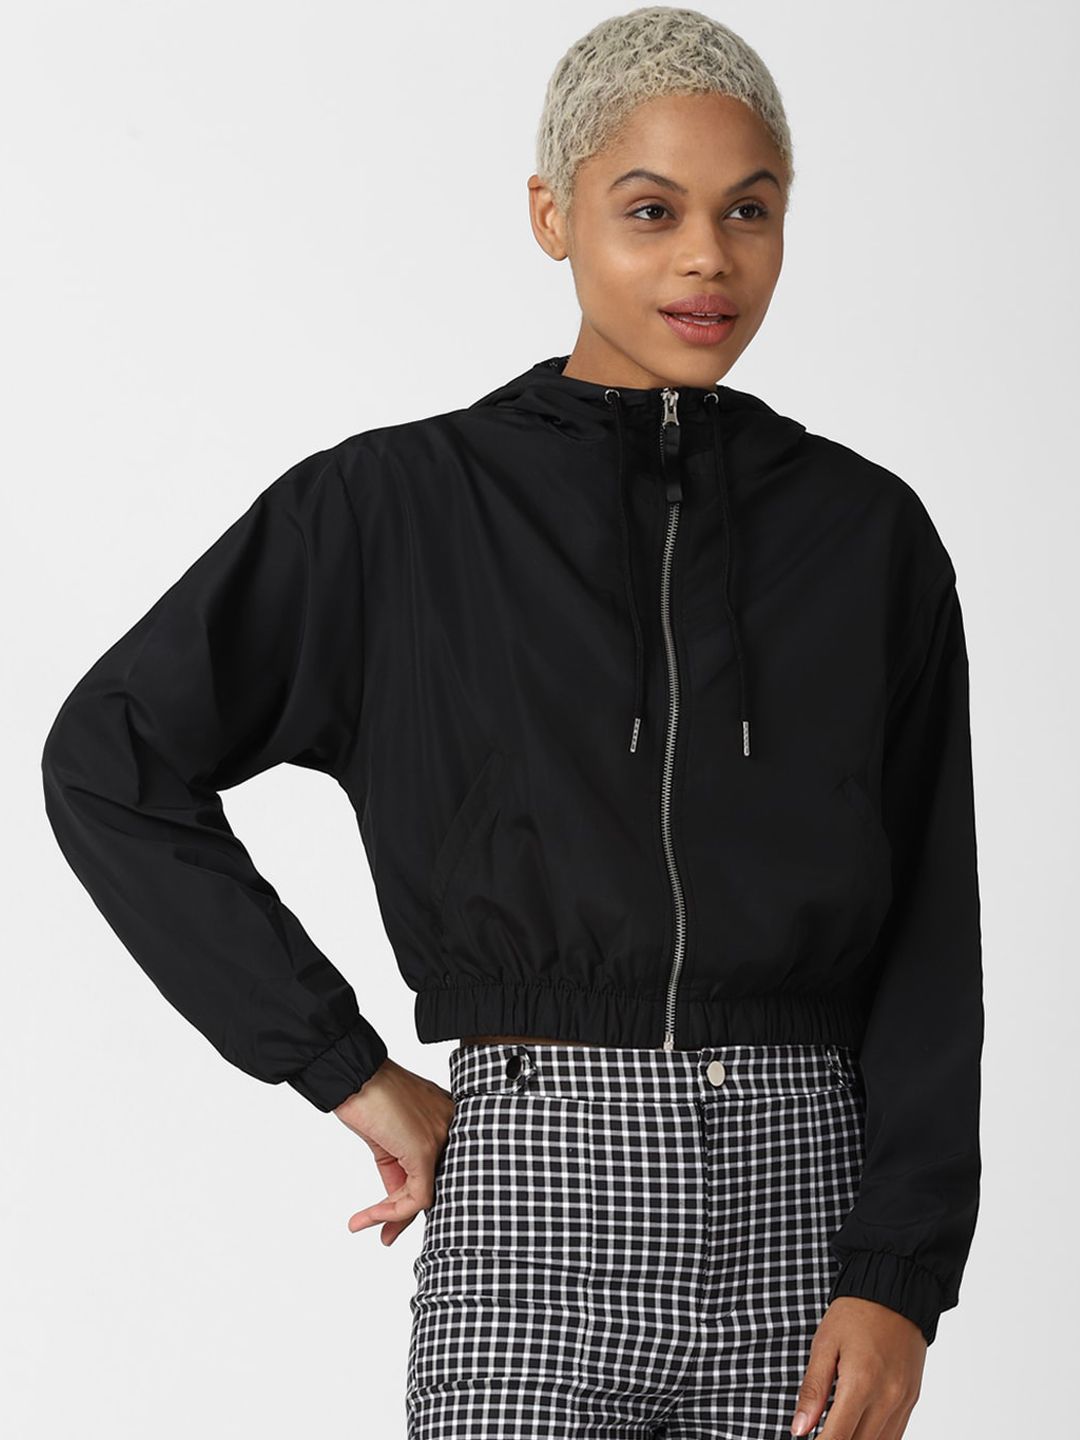 FOREVER 21 Women Black Tailored Jacket Price in India